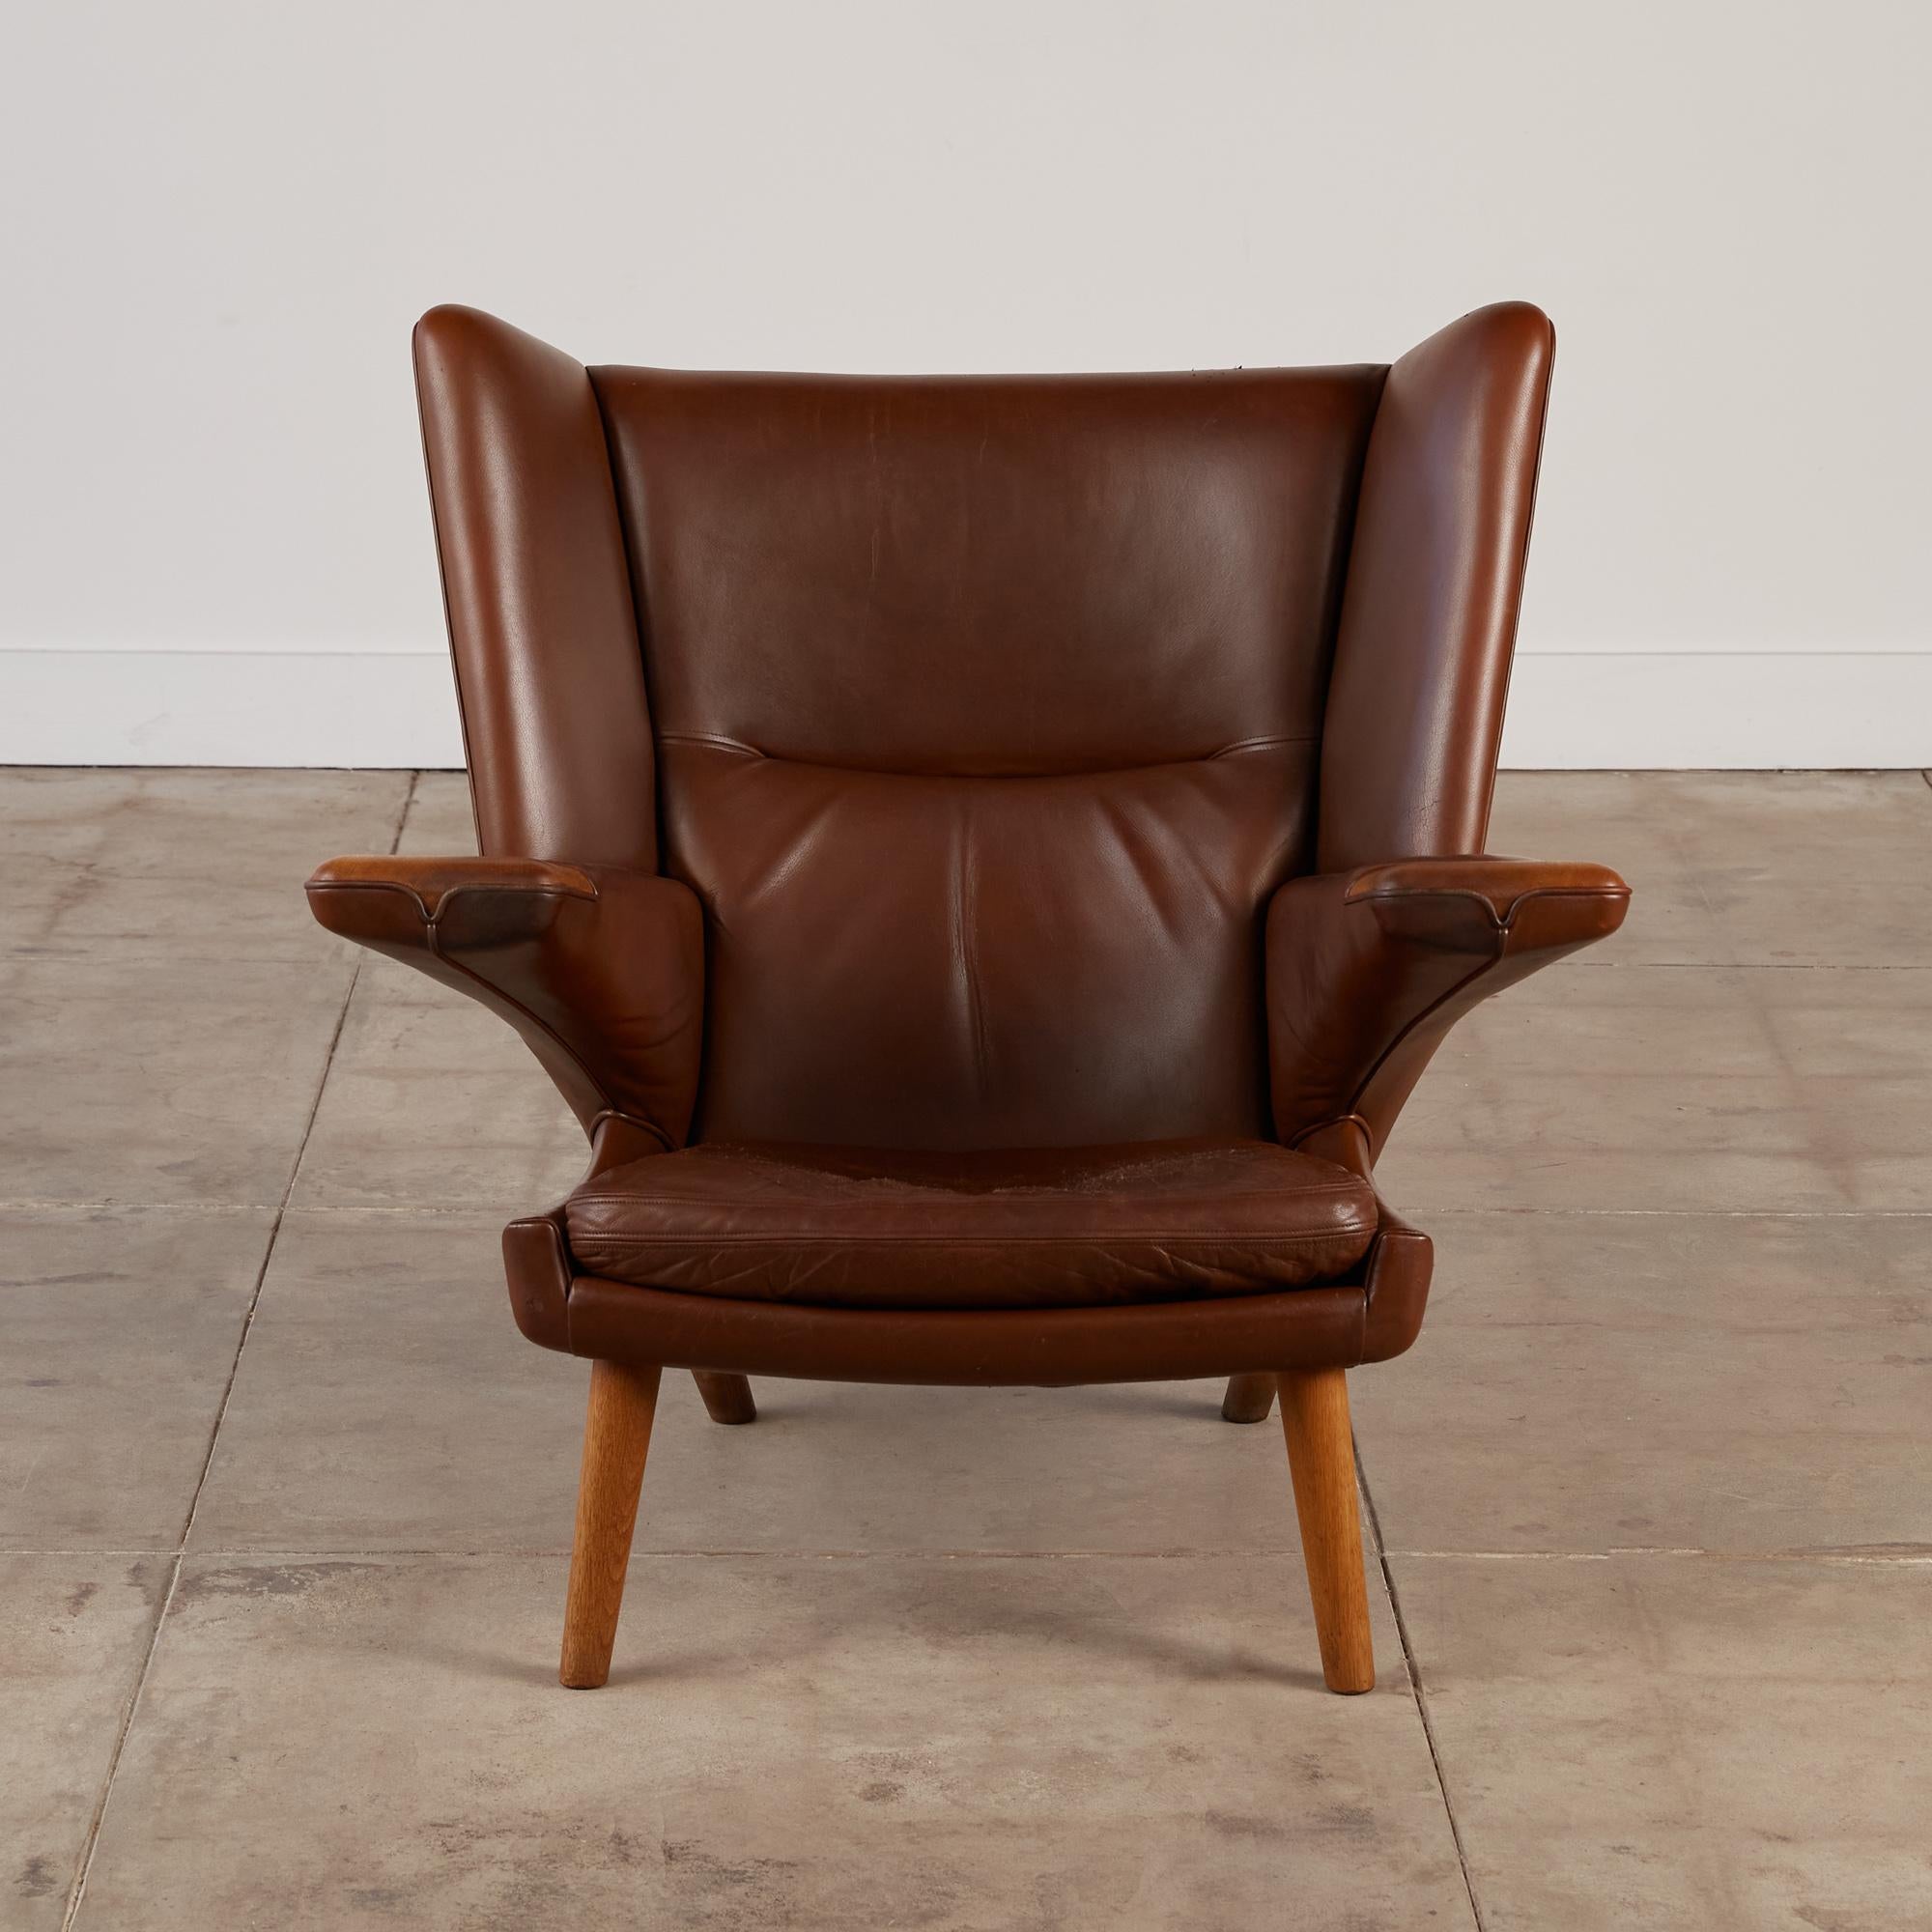 A rare edition of Hans Wegner's most iconic chair, the Mega Papa Bear Chair. This piece has all the elements of the classic Papa Bear Chair: elegant paneled detailing in the backrest upholstery, a dramatic wing-back, and cantilevered arms. The